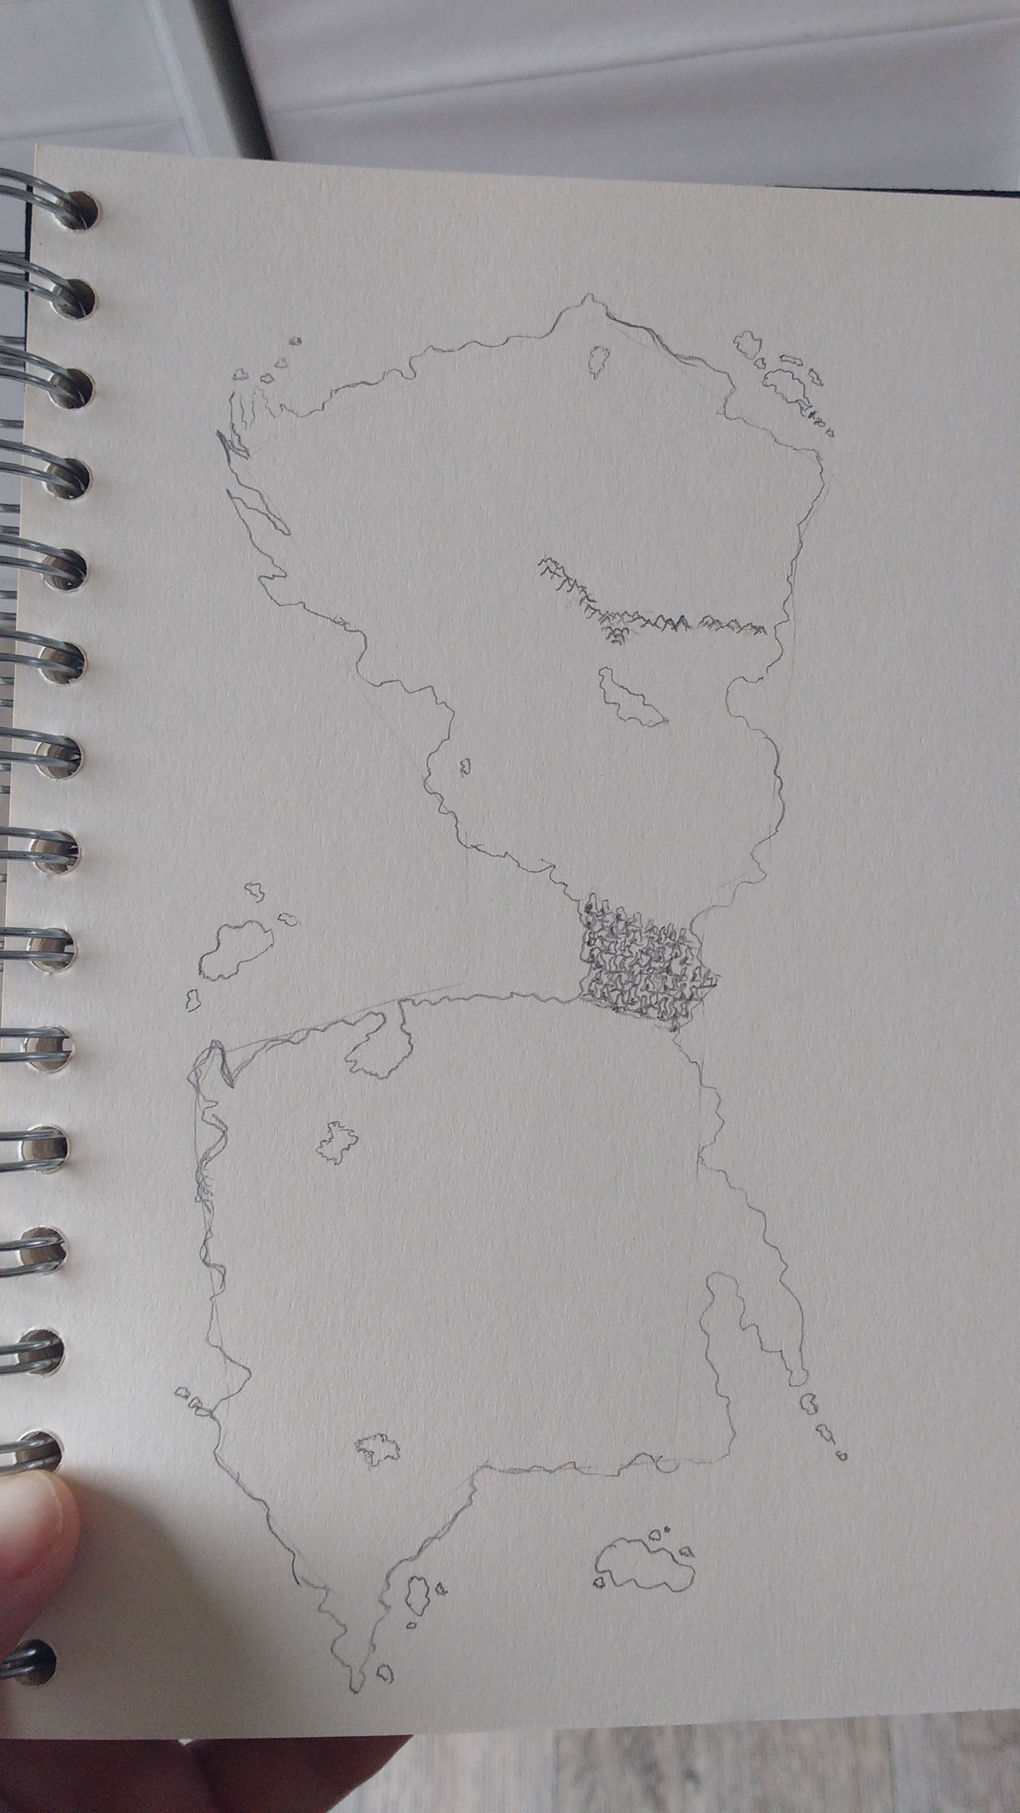 A pencil sketch of an America like continent with construction lines around the coast still